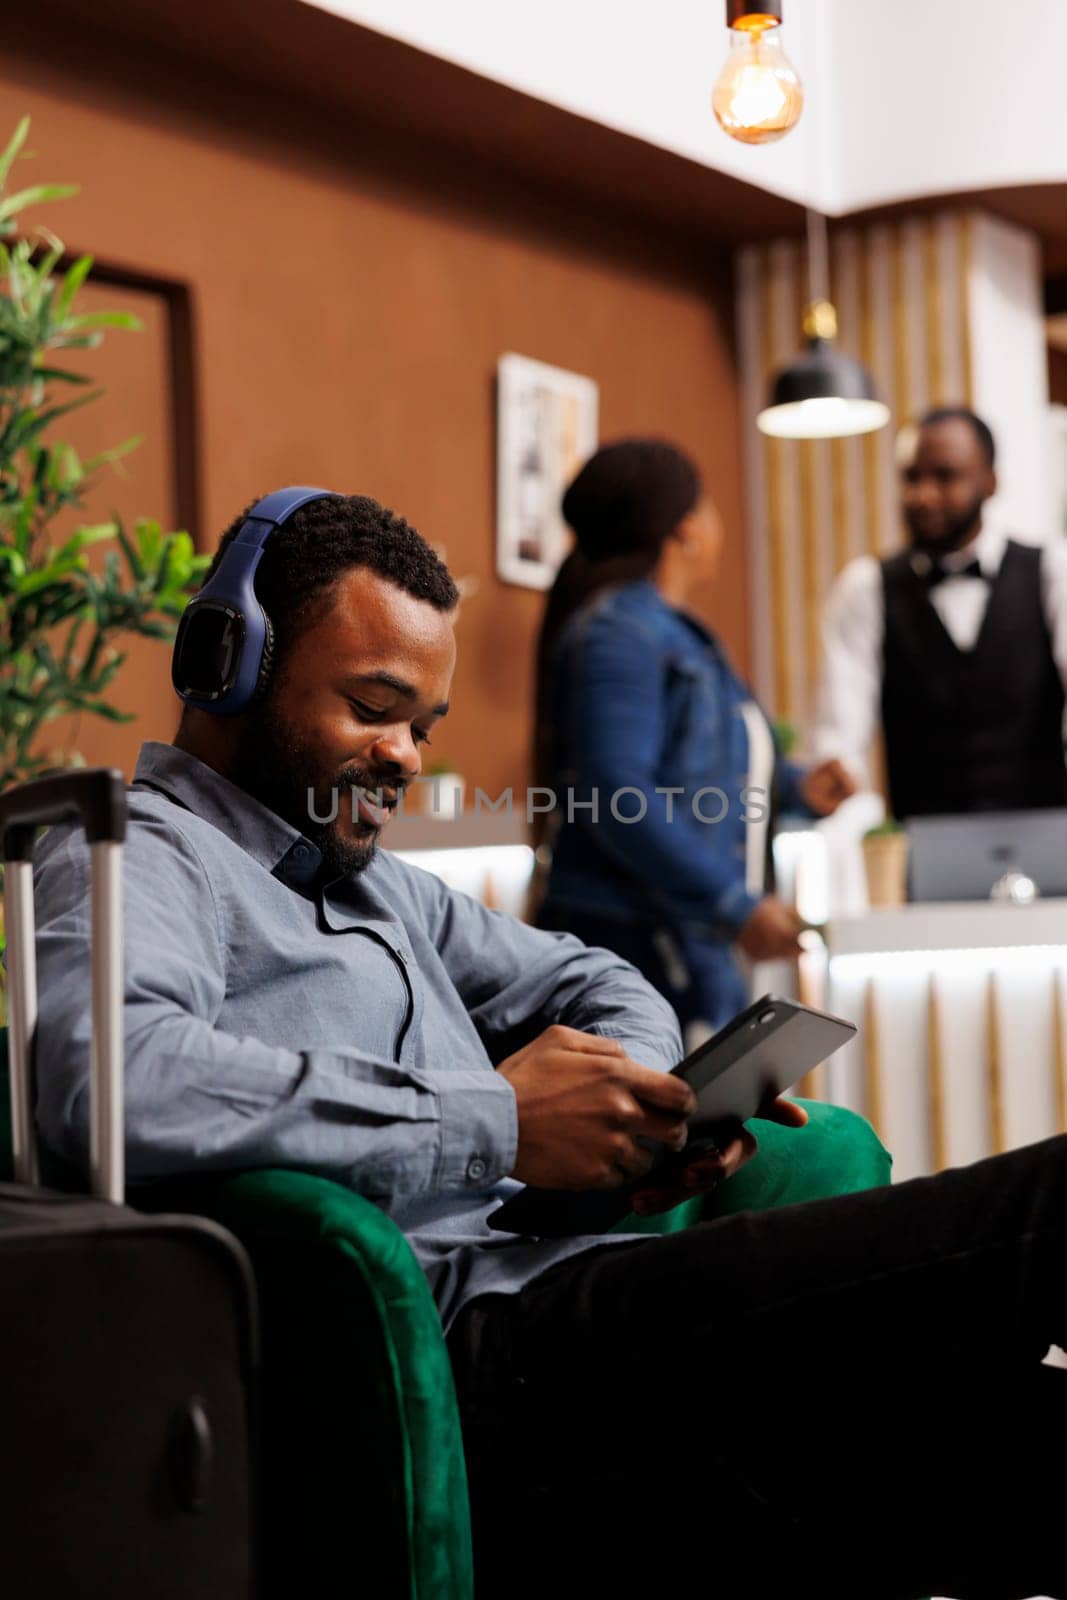 Smiling African American guy traveler sitting with luggage in hotel lobby, male tourist holding digital tablet connecting internet wifi while waiting for room to be ready. Guest self check-in